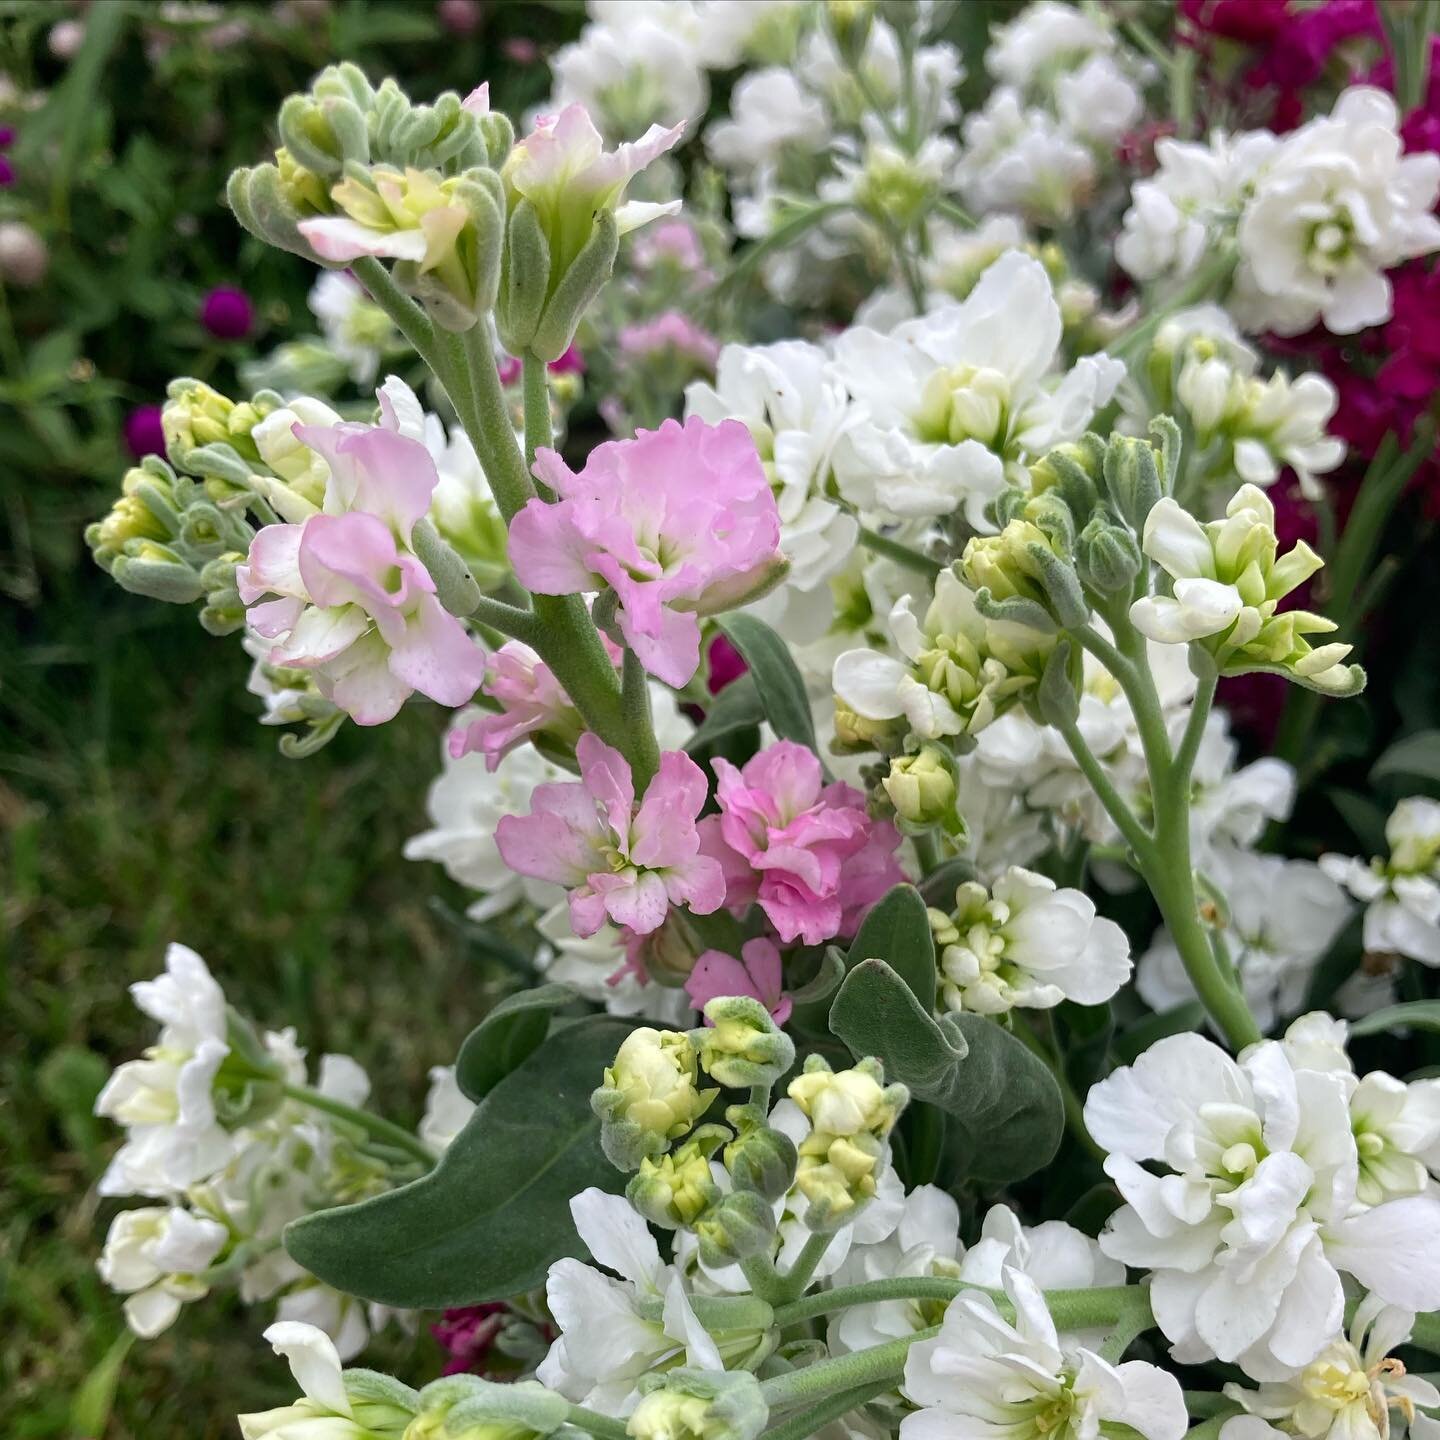 One of the best parts of growing flowers in Vermont is the return of cool flowers as the weather starts to cool off. Stock is a garden favorite that loves cool weather. The little patch we planted for fall has started to open and fill the world with 